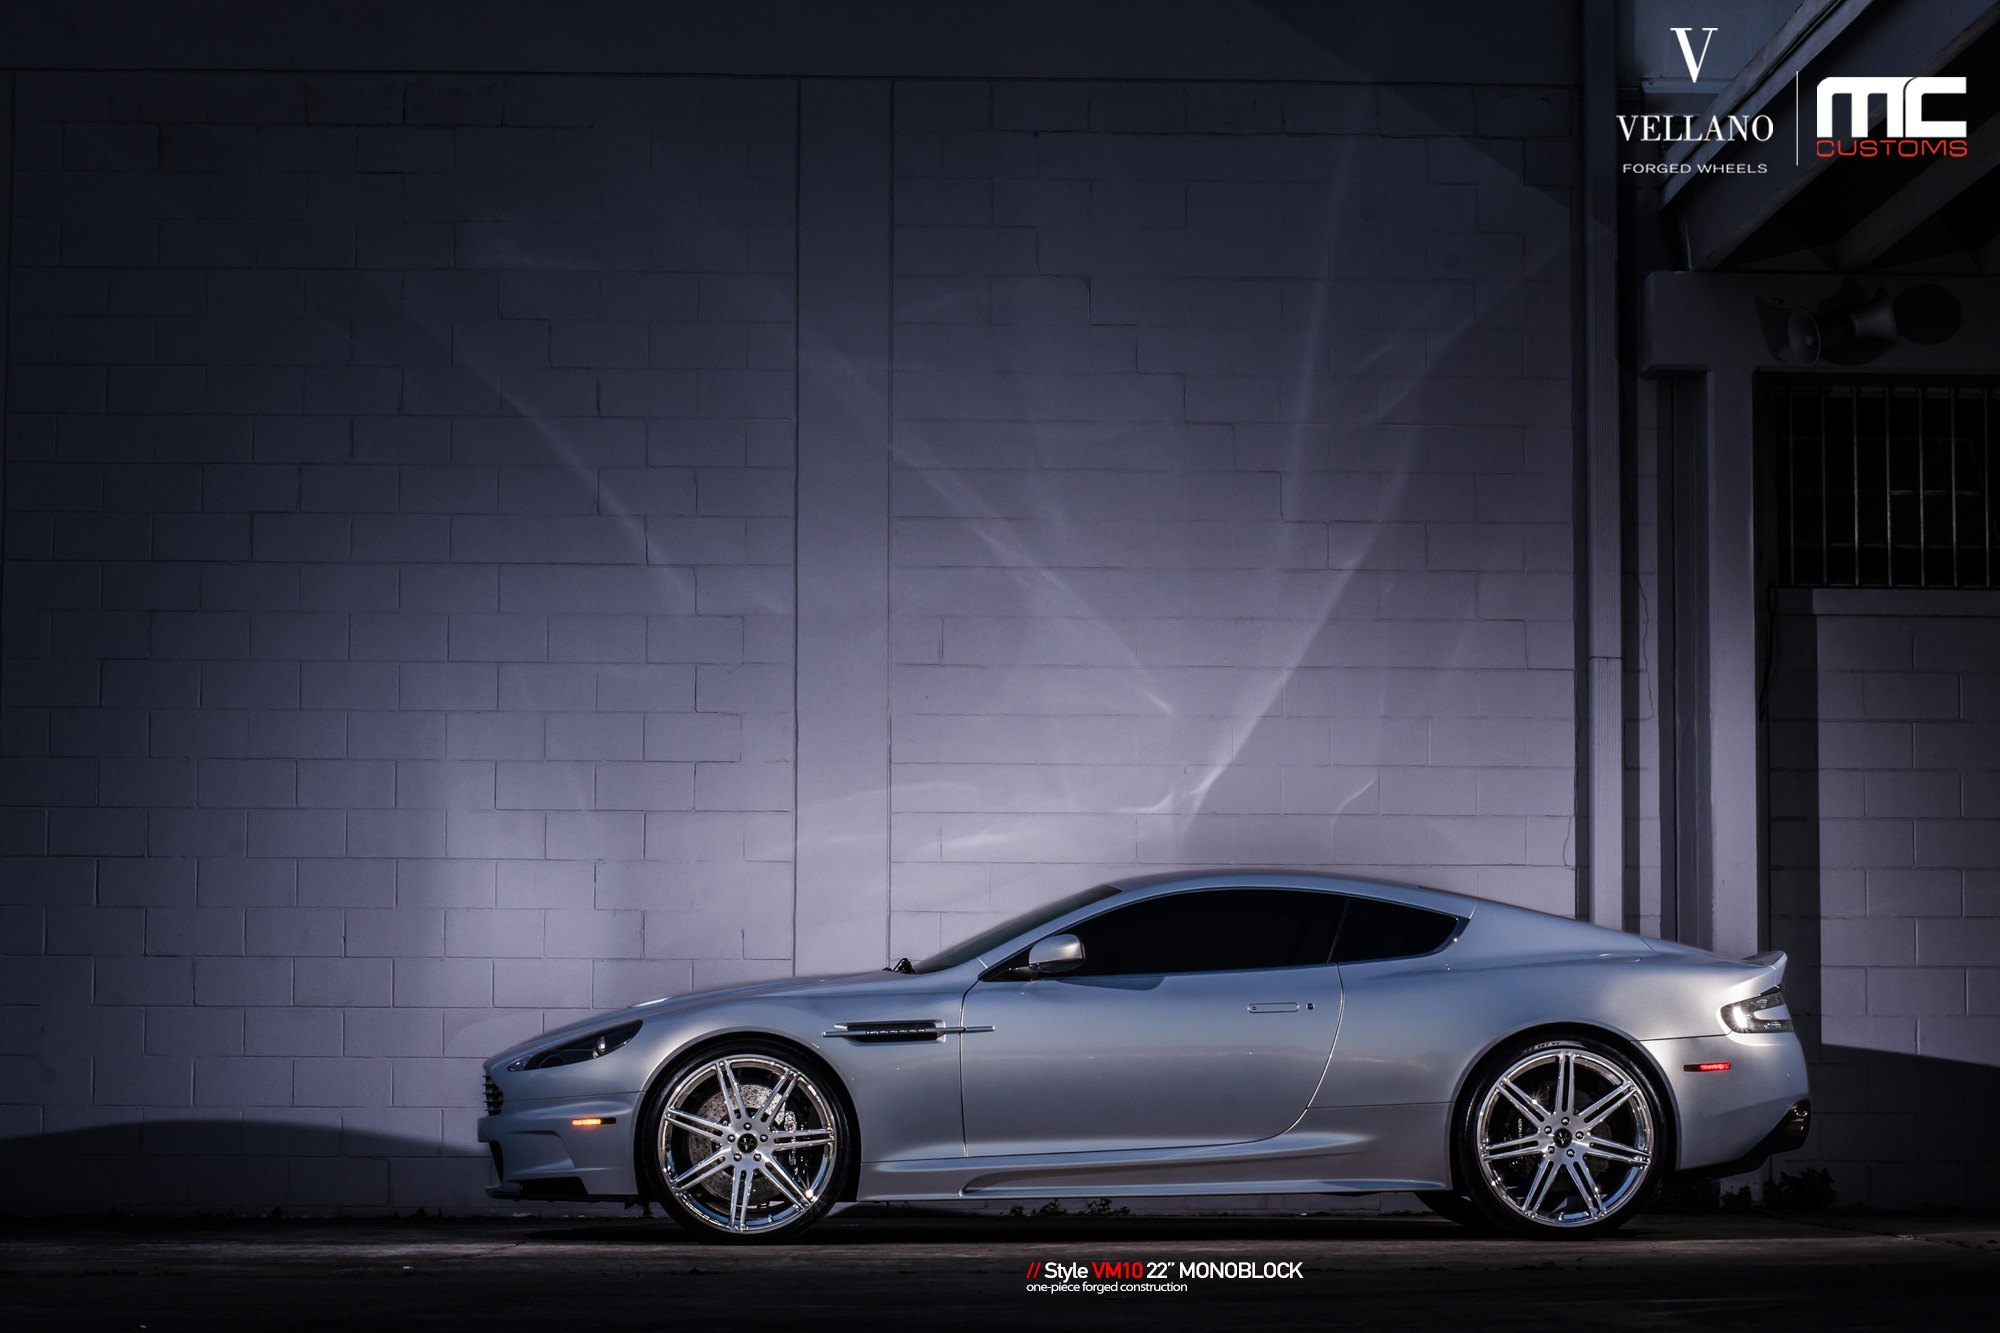 Aftermarket Side Skirts on Silver Aston Martin DBS - Photo by Vellano